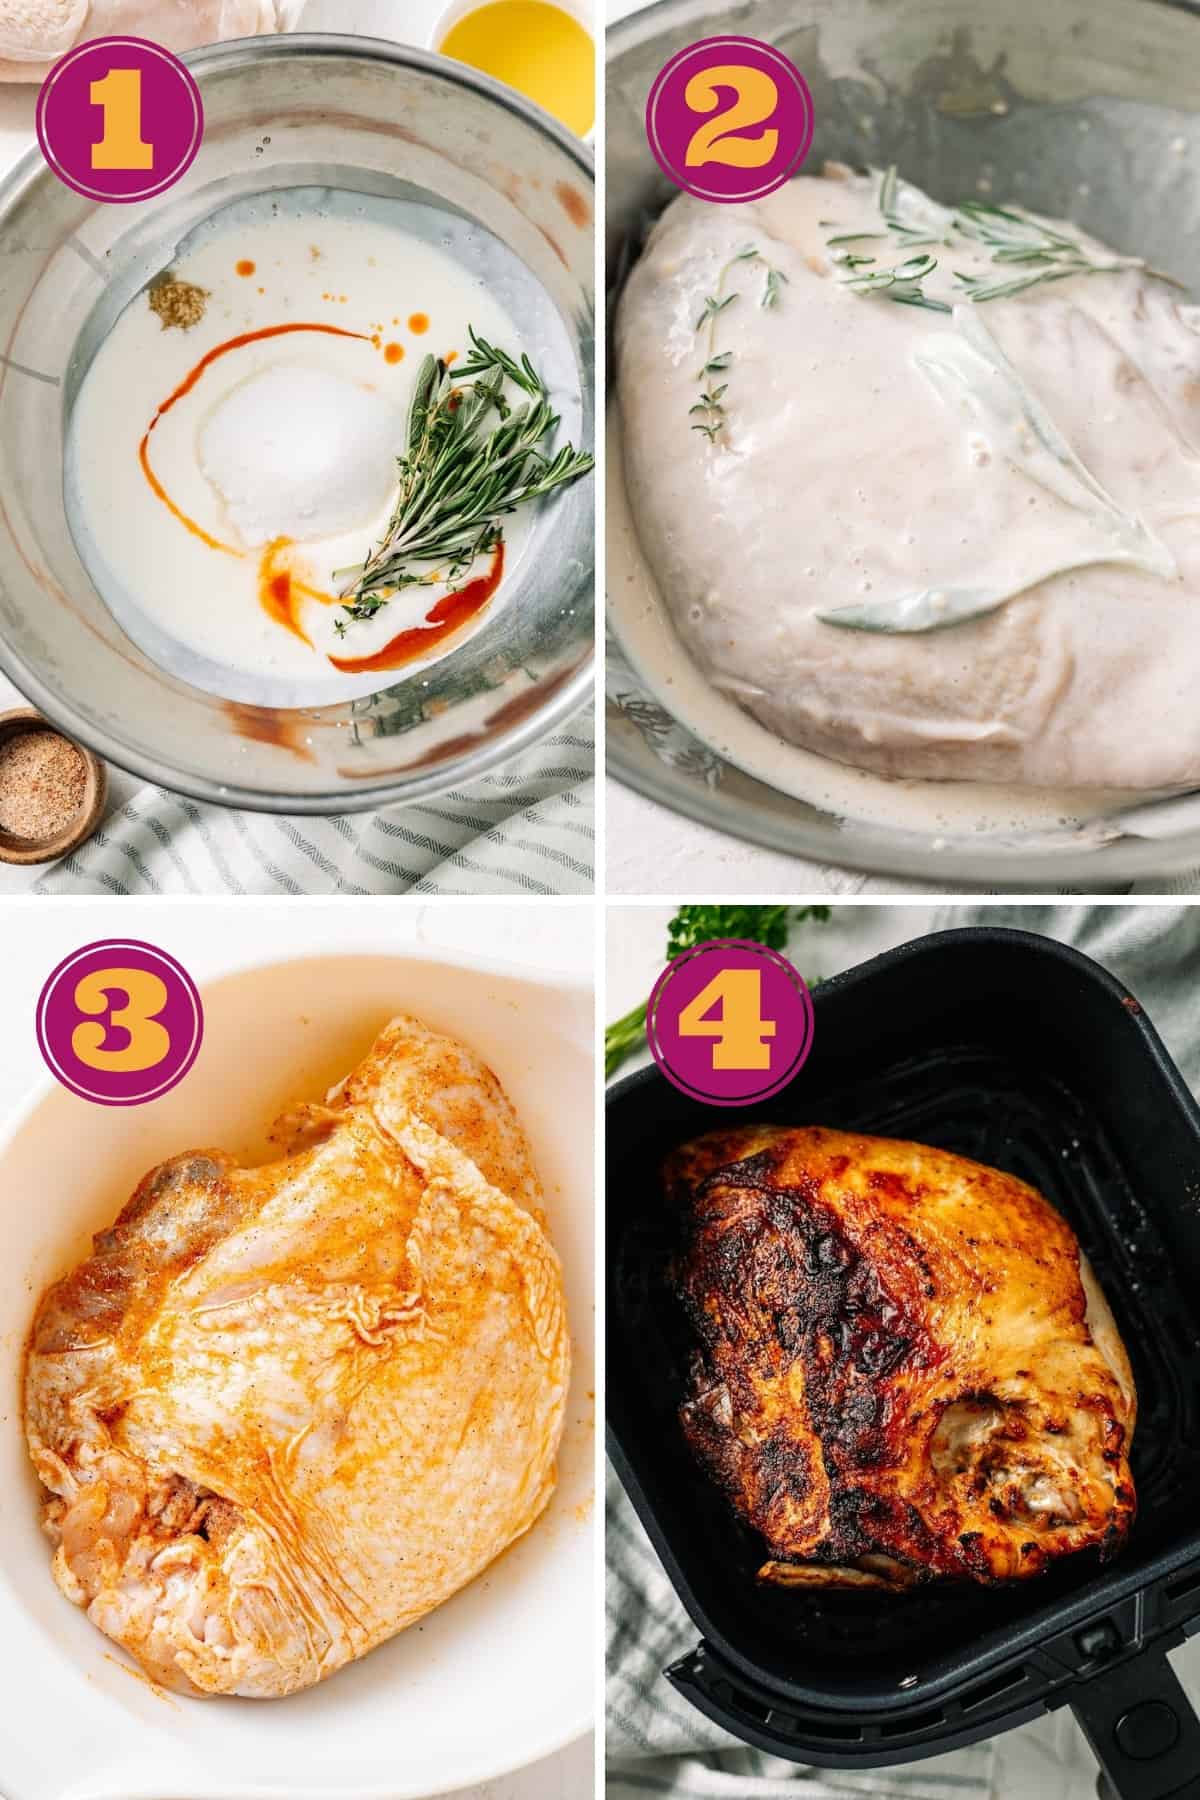 Four numbered pictures: first, herbs, hot sauce, and buttermilk in a mixing bowl; second, a turkey breast covered in a buttermilk brine; third, a turkey breast covered in a spice rub; and fourth, a turkey breast in the air fryer